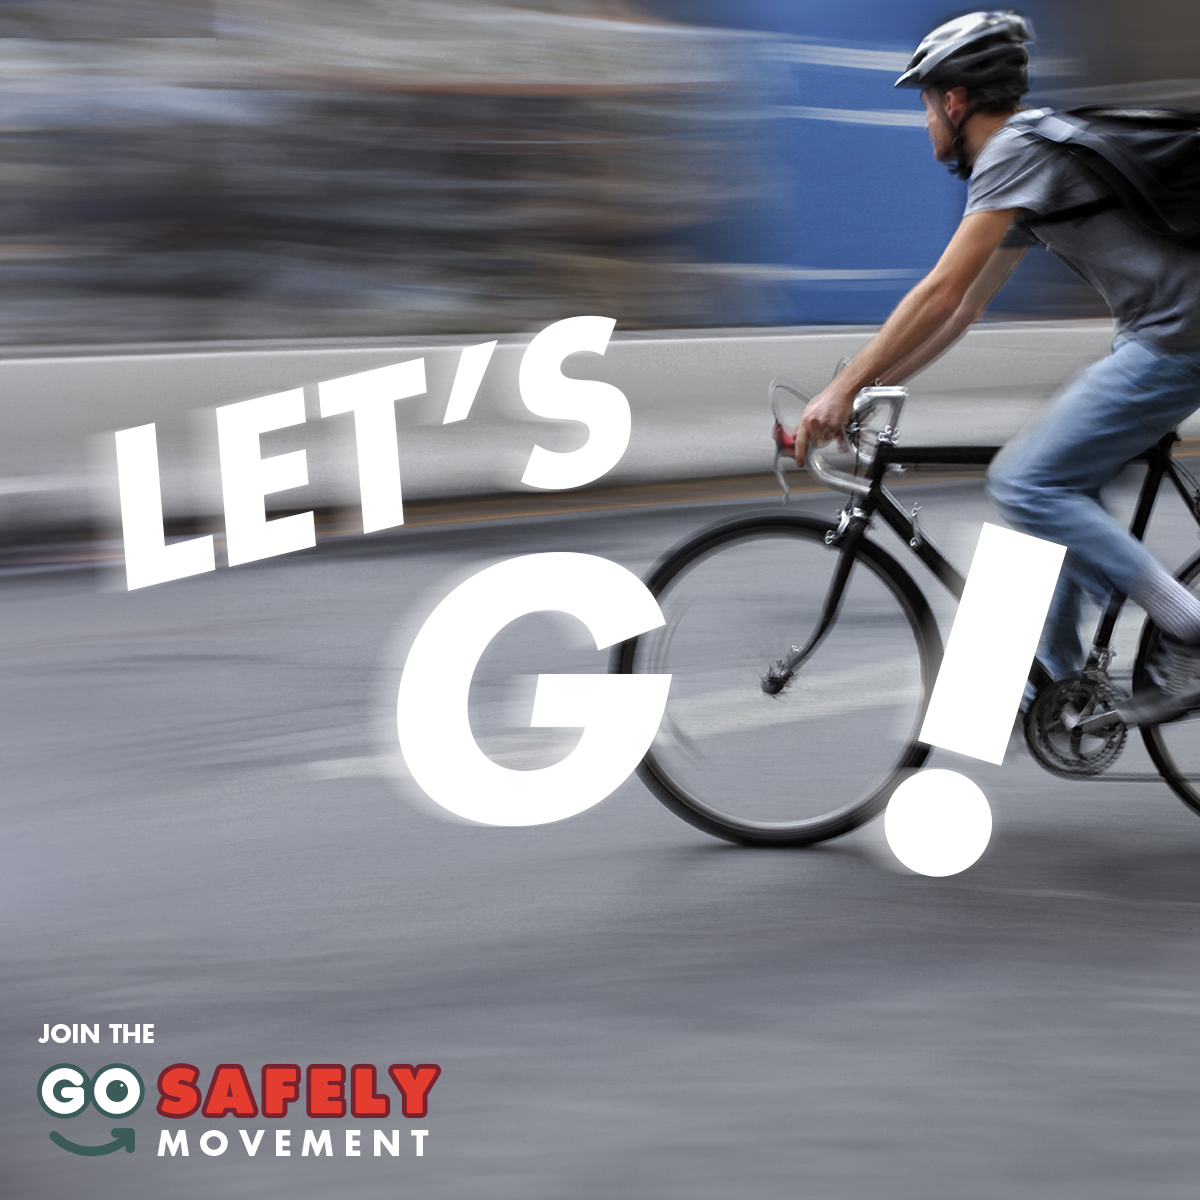 LET’S GO cautiously, patiently, and responsibly, California! Get on board with The Go Safely Movement. Commit to becoming a Traffic Safety Champion at gosafelyca.org/trafficsafetyc…. #GoSafelyCA @CaltransHQ